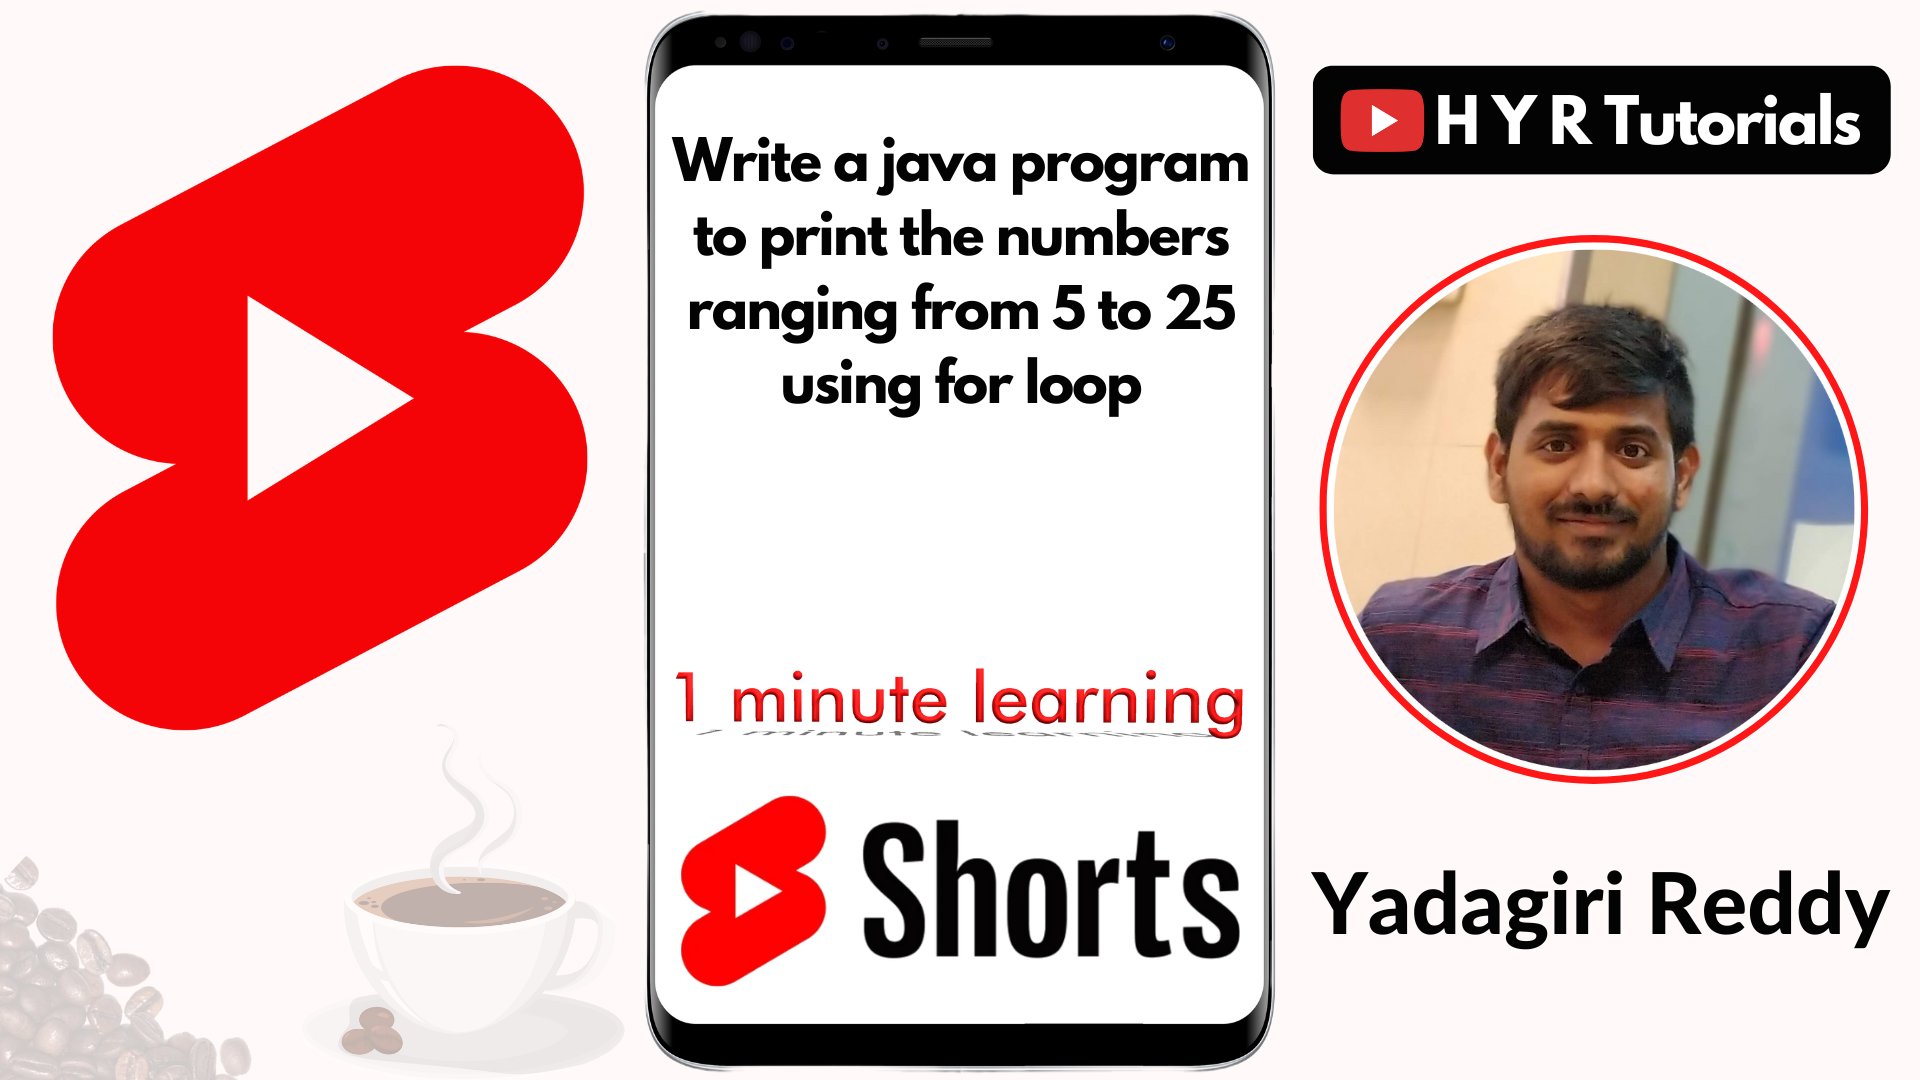 write a java program to print the numbers ranging from 5 to 25 using for loop